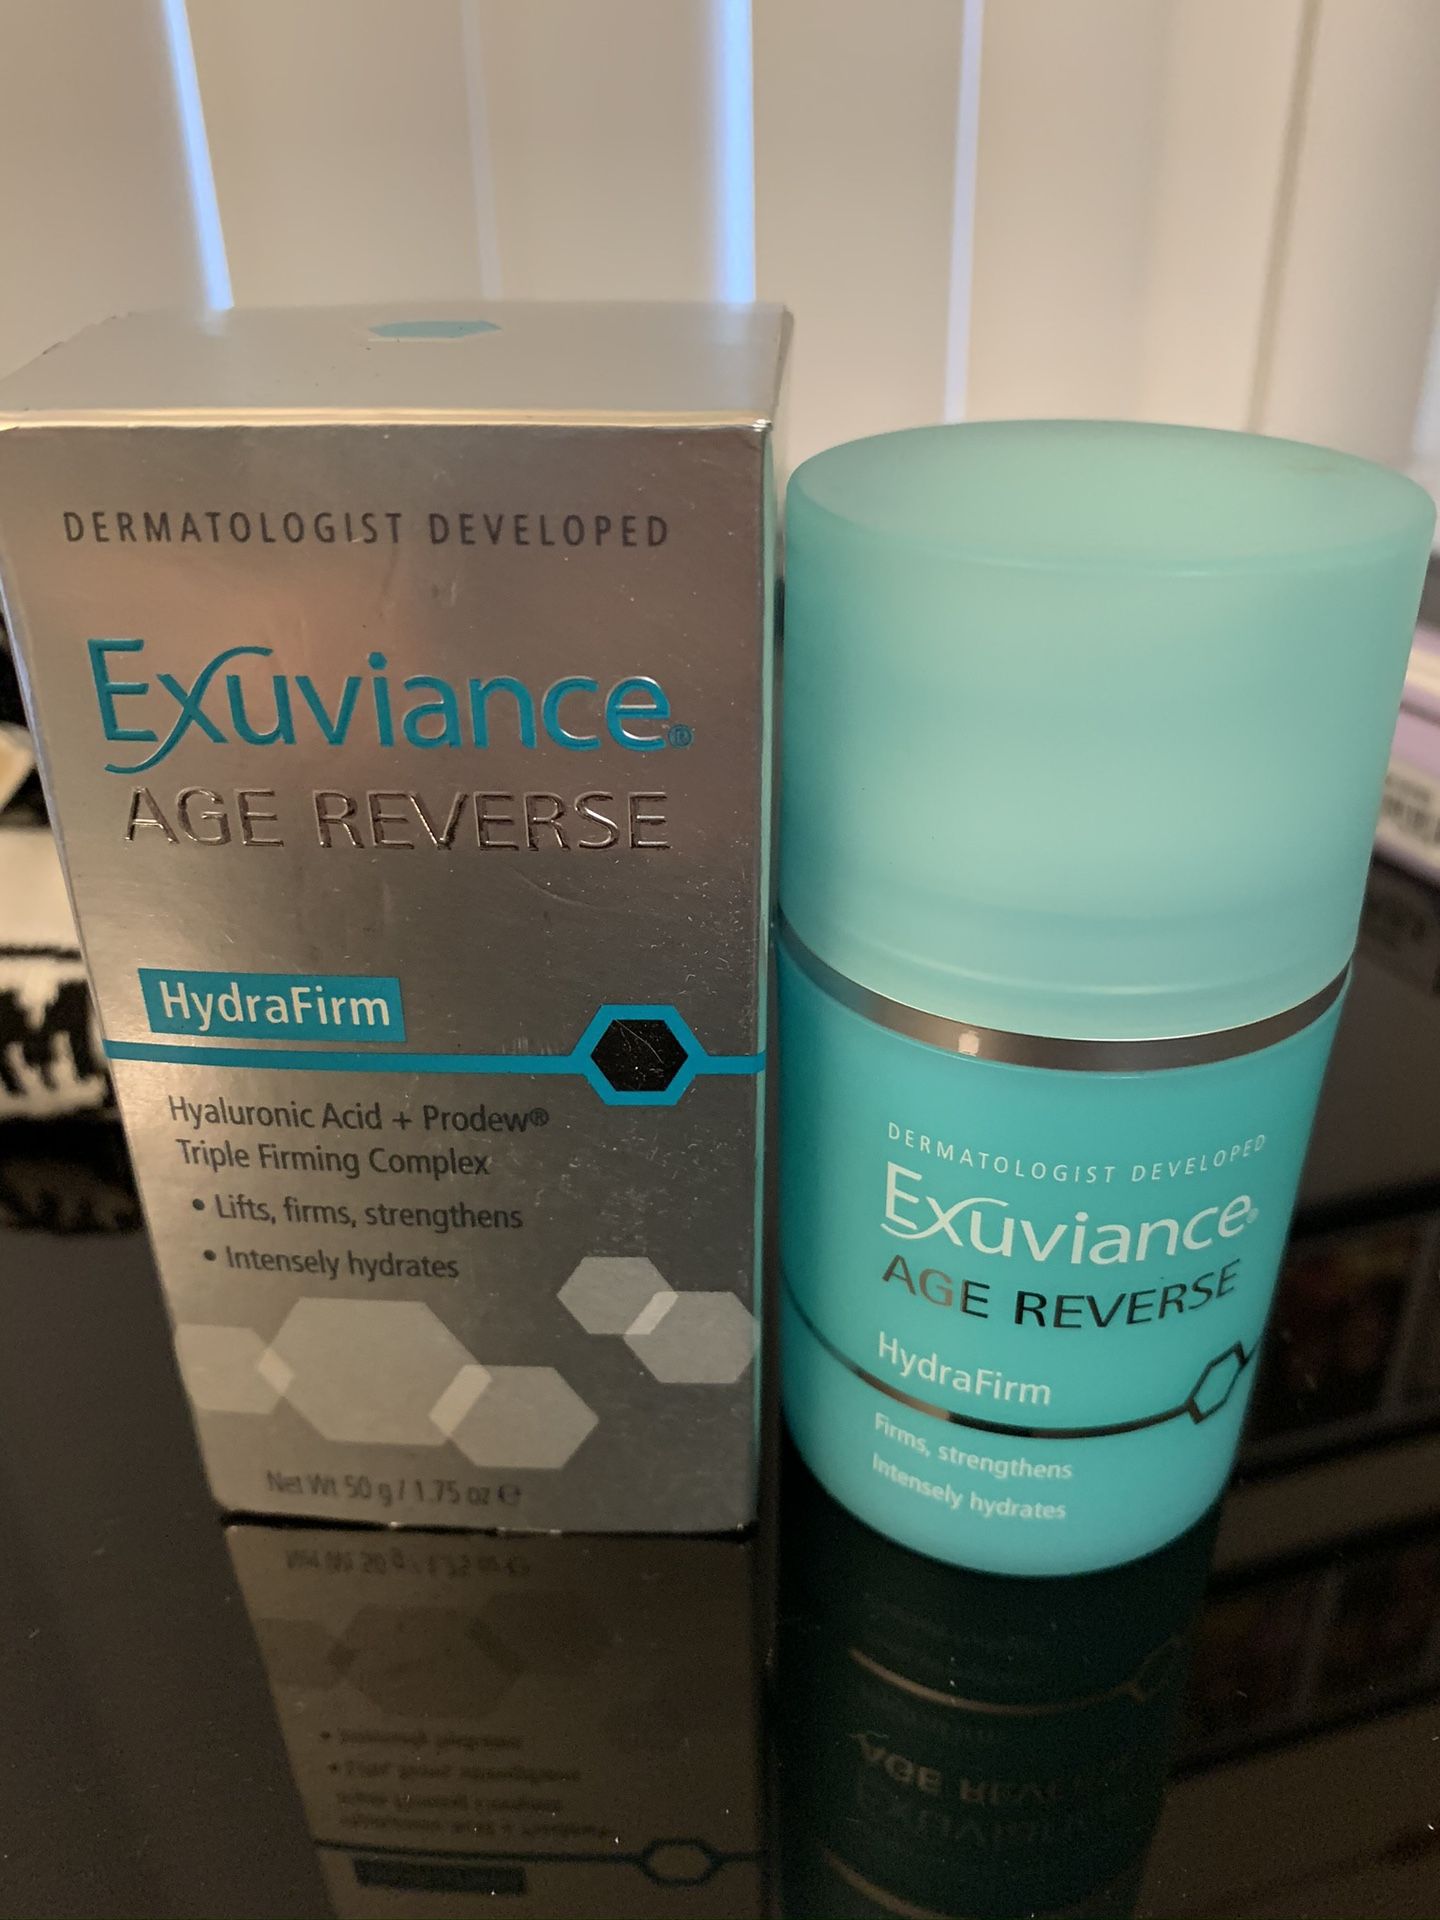 BRAND NEW: Exuviance Age Reverse Hydra Firm